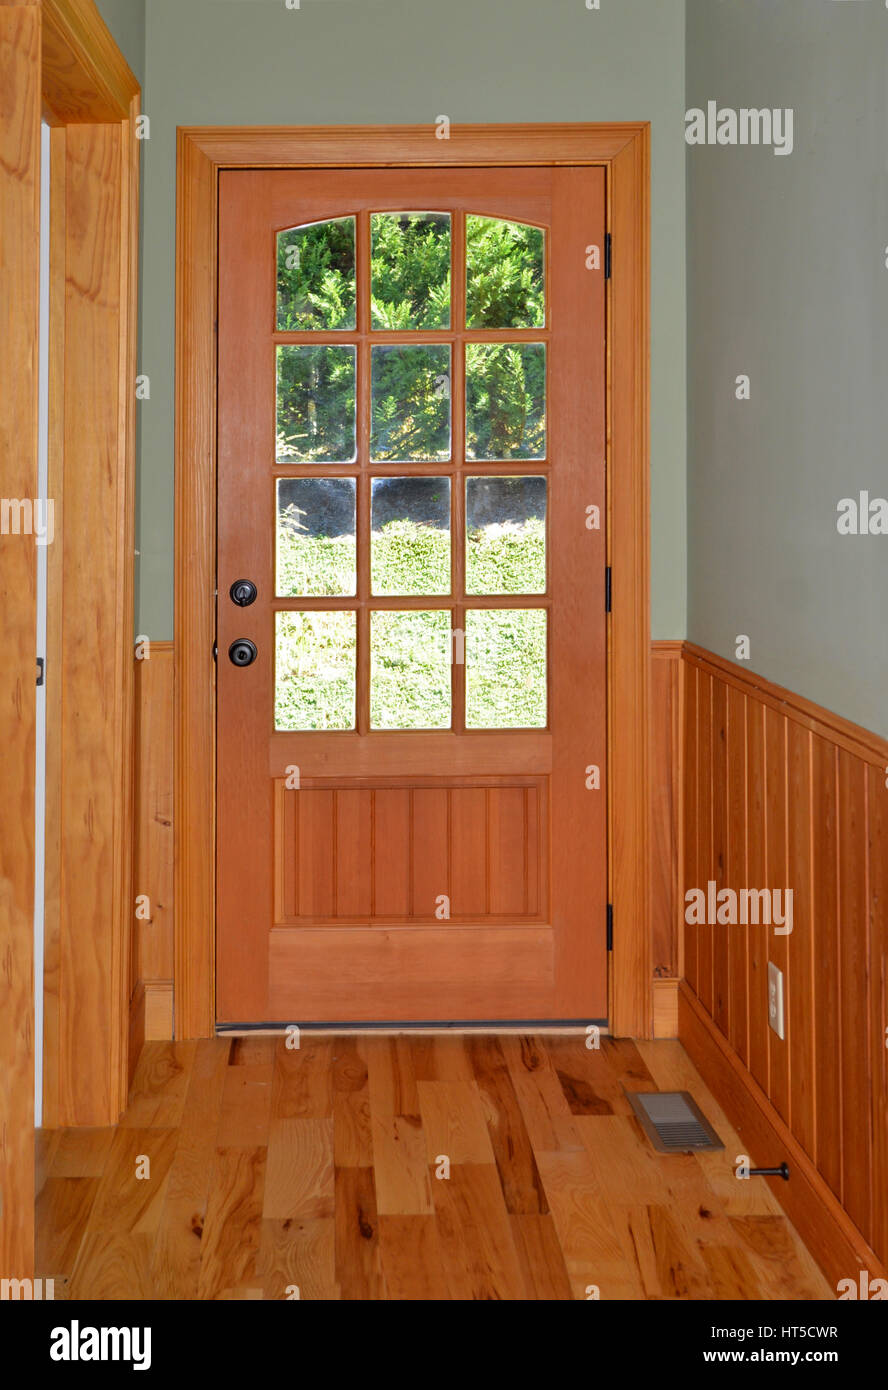 Doorway At The End Of A Hall In A House Stock Photo 135344211 Alamy